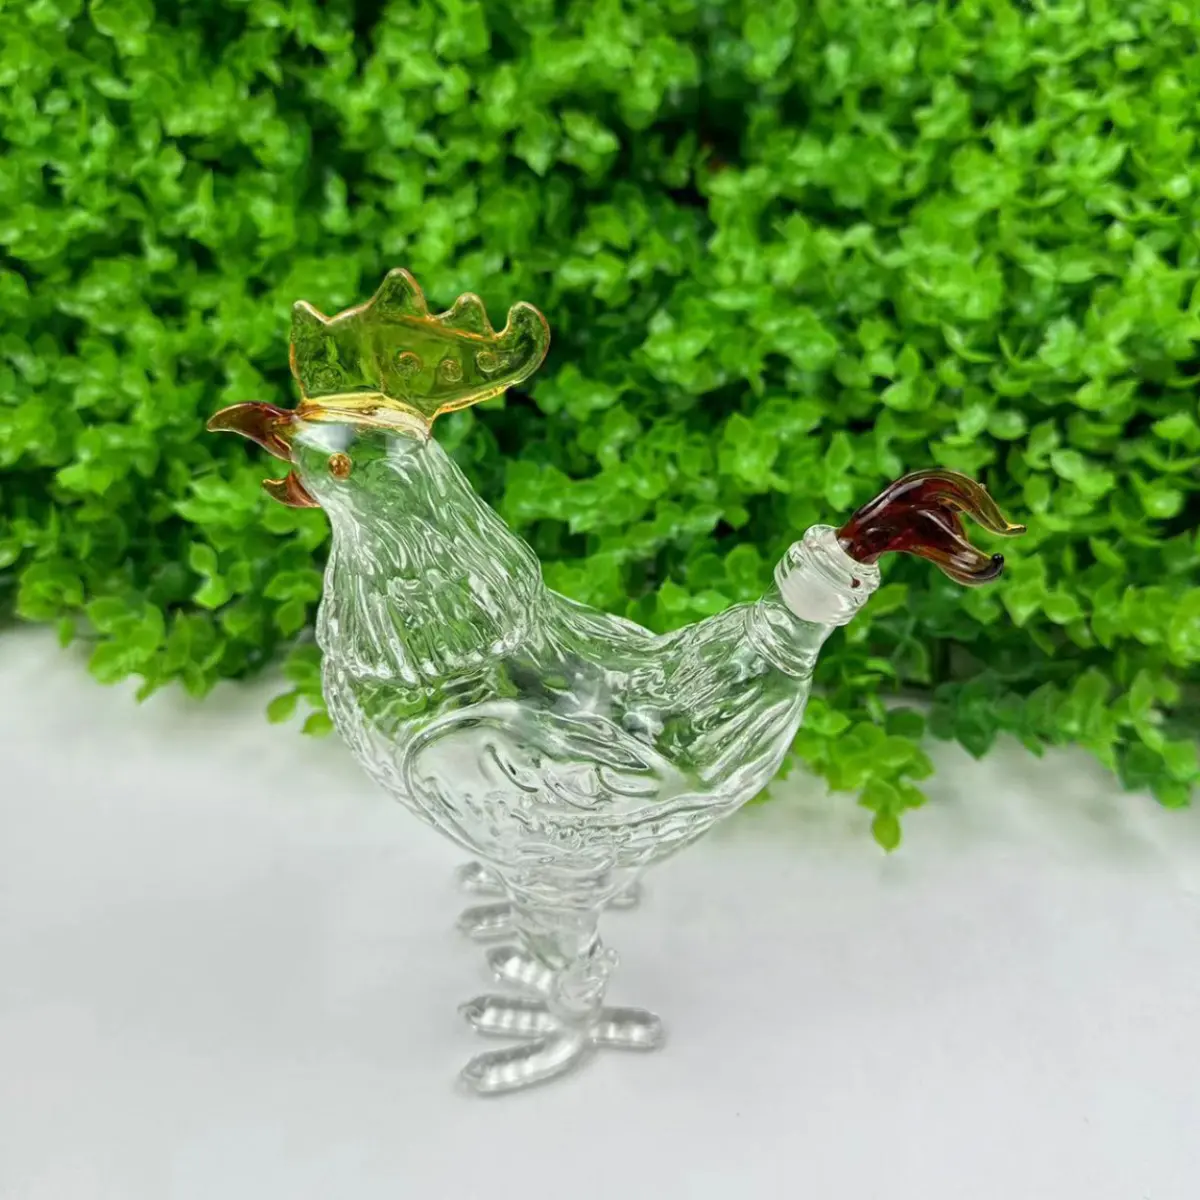 100ml Good Quality Animal chicken shaped clear glass wine decanter bottle